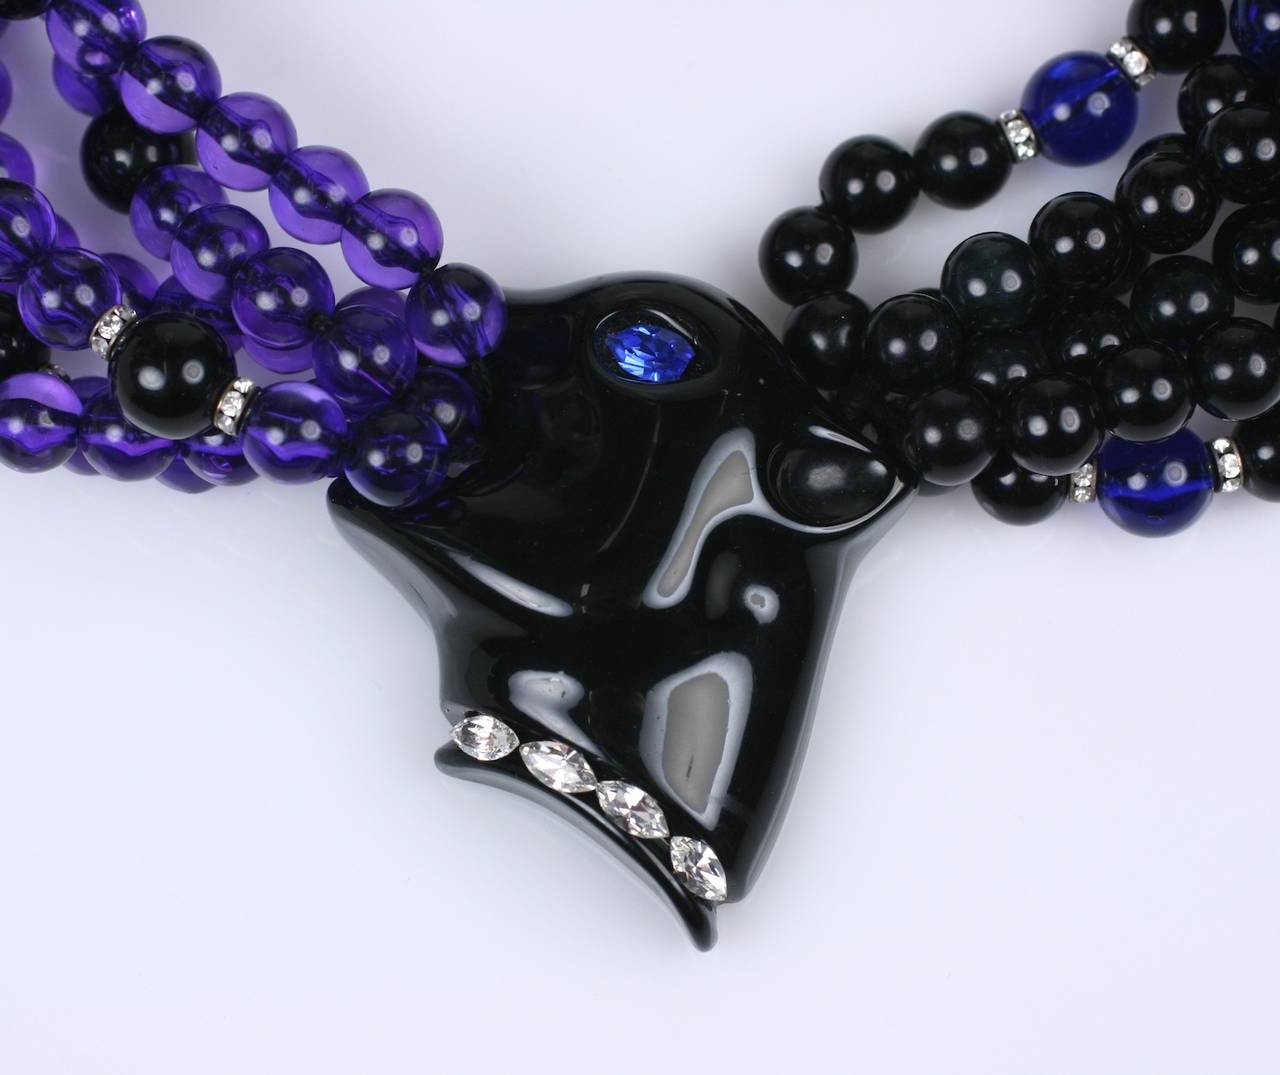 Italian Bakelite Panther Necklace, 6 strands with pave rondels accents. One set of beads are black and the other are violet. The panther head is set with pave marquise stone collar and a faux sapphire eye. 
Italian plastics are known to be the